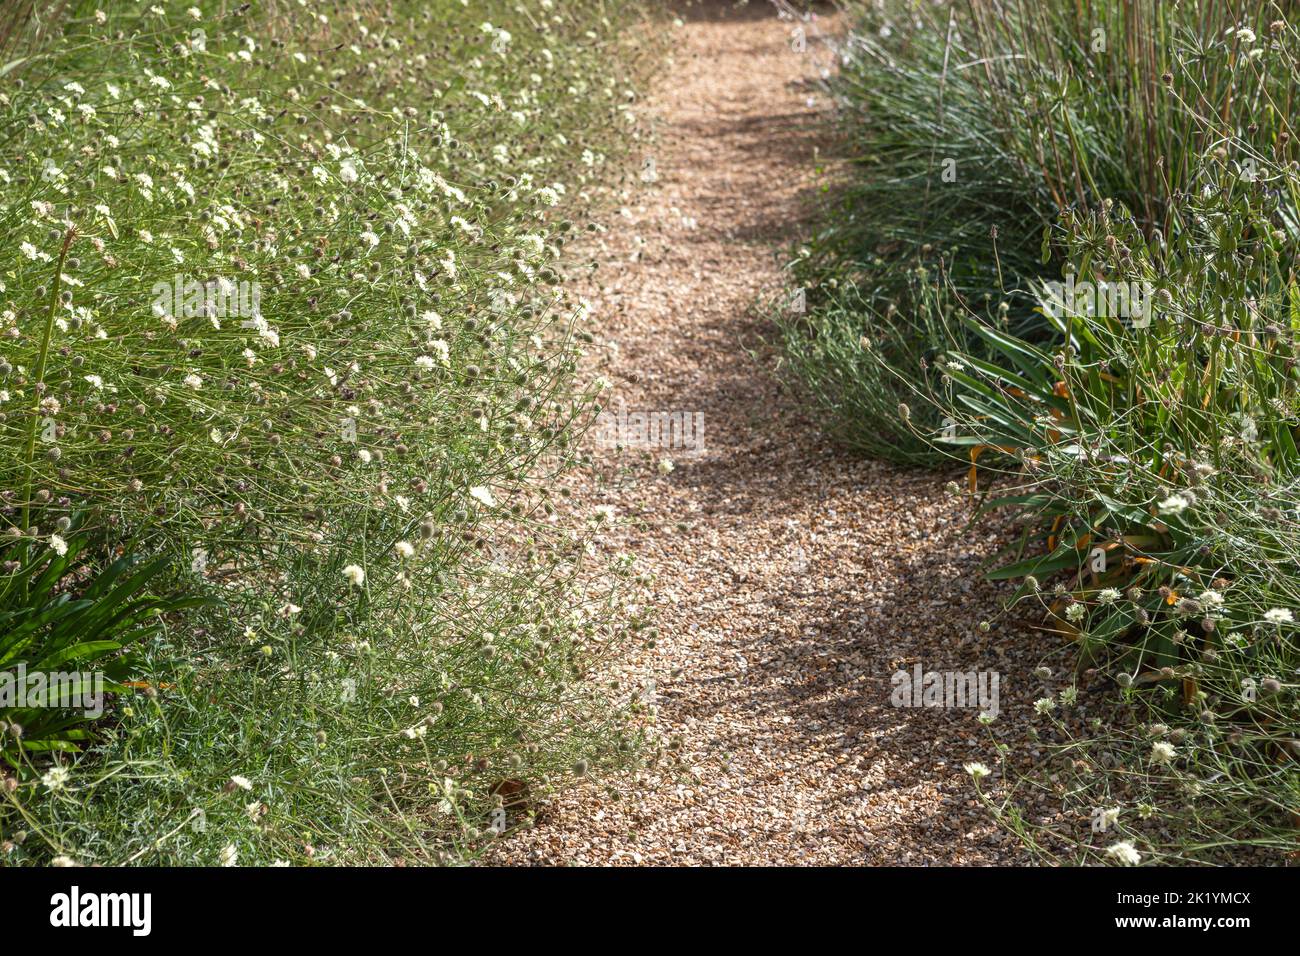 Dry garden - gravel path flanked by flowering Scabiosa columbaria var. ochroleuca (Pincushion flower, pale yellow scabious) Stock Photo